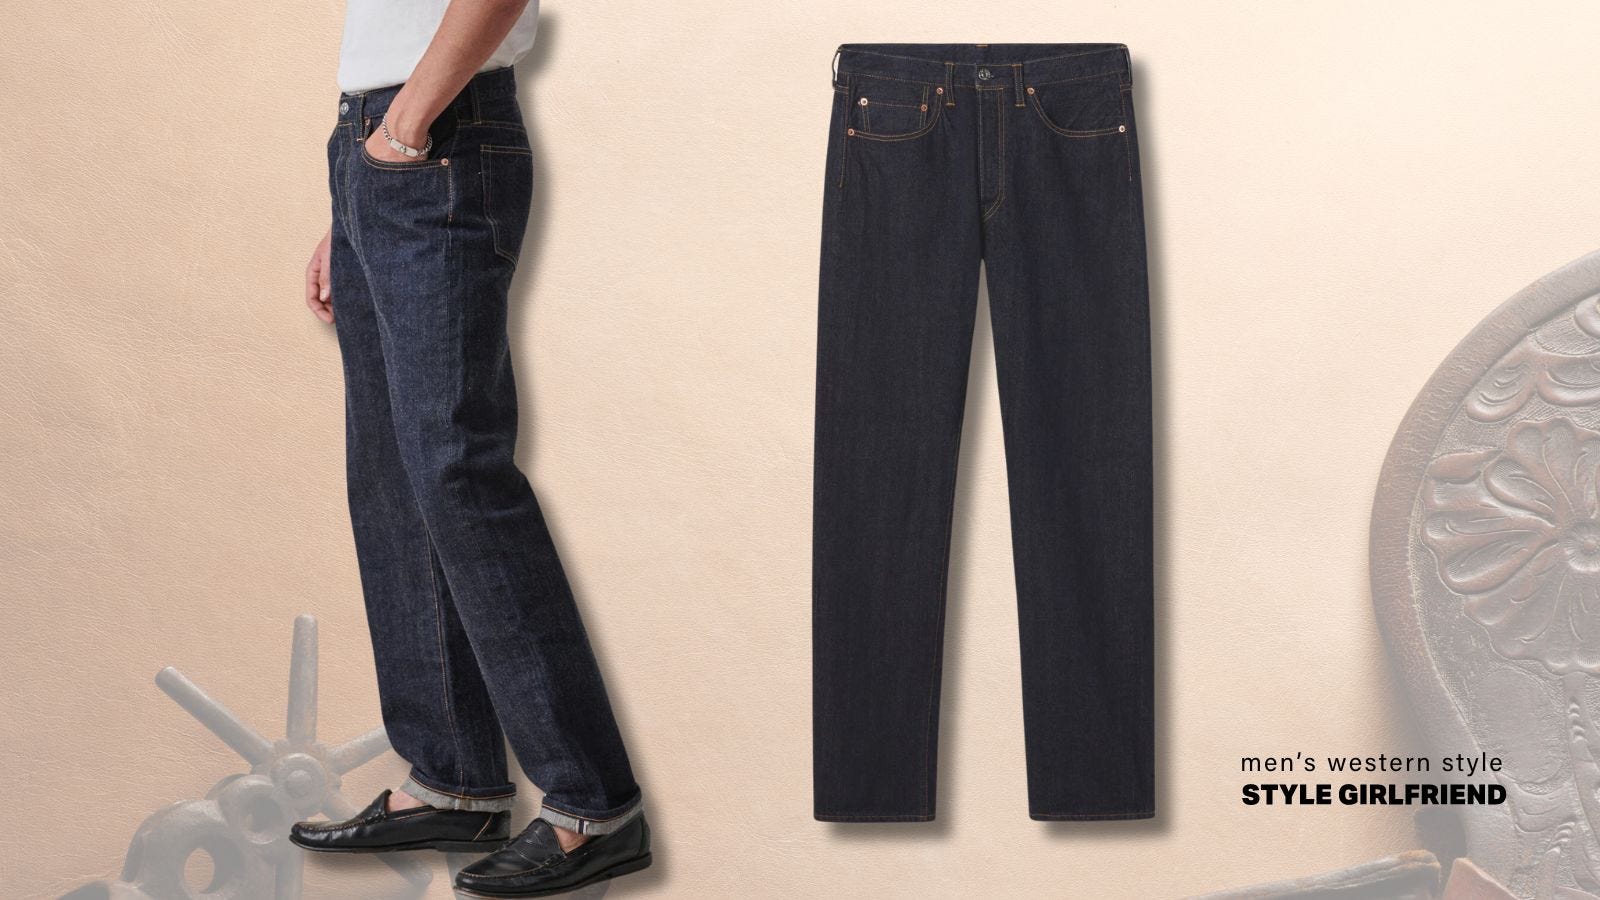 side by side images, lower half of a man standing sideways and wearing a white t-shirt, dark jeans, and black loafers, image on the right is a product flatlay of the jeans from the front